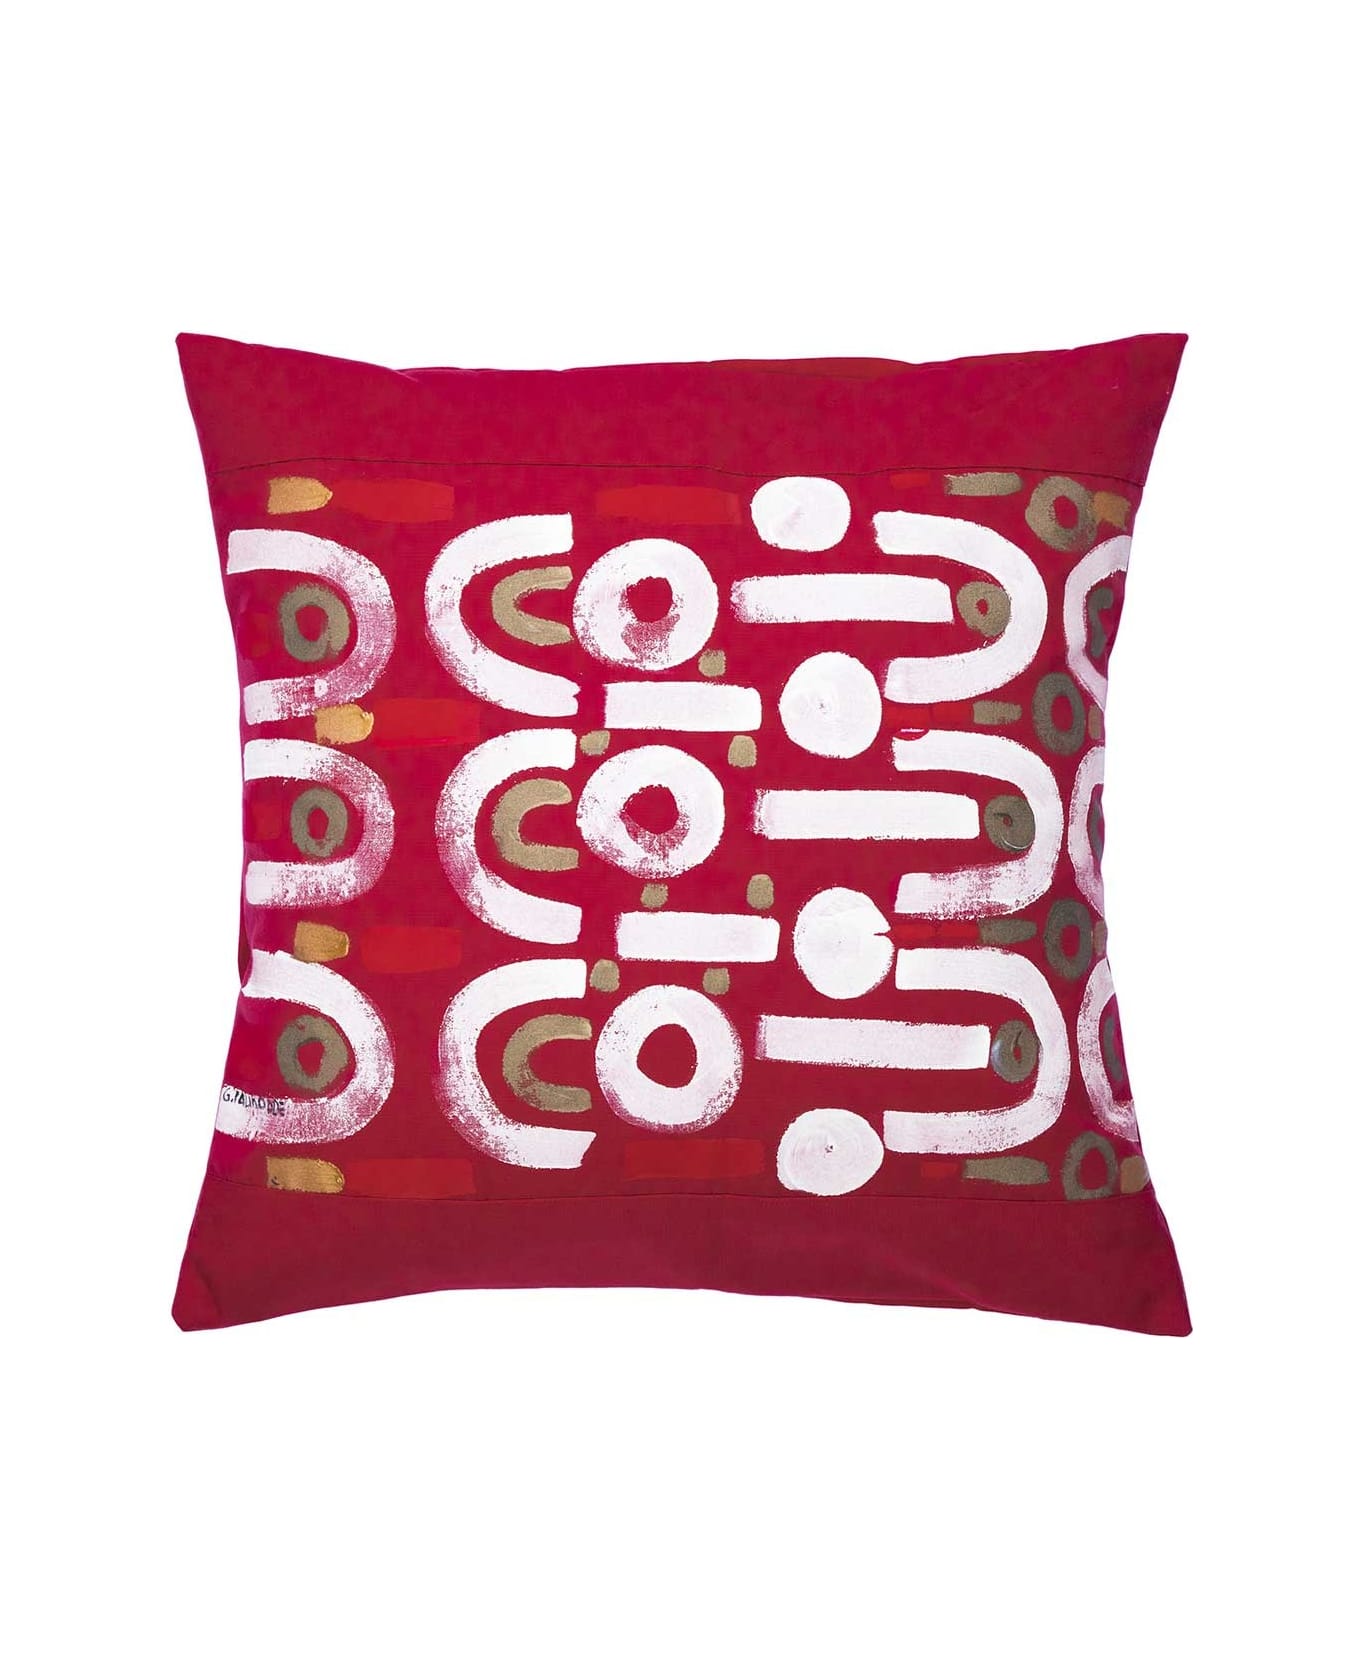 Le Botteghe su Gologone Hand Painted Cushions 70x70 Cm - Red Fantasy